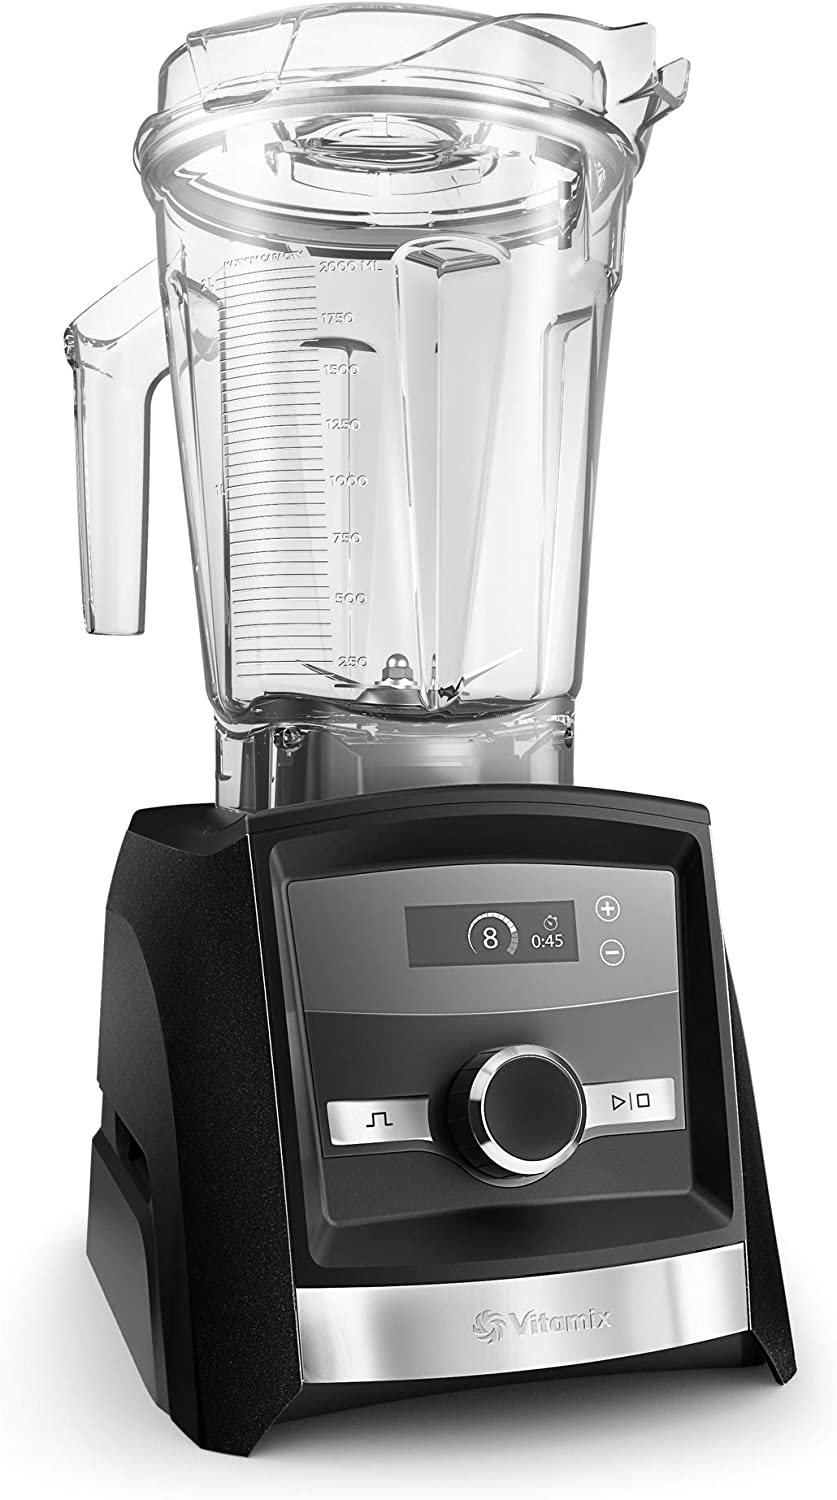 Vitamix Con A3300 Ascent Series Smart Blender, Professional-Grade, 64 oz. Low Profile Container, Brushed Stainless Finish